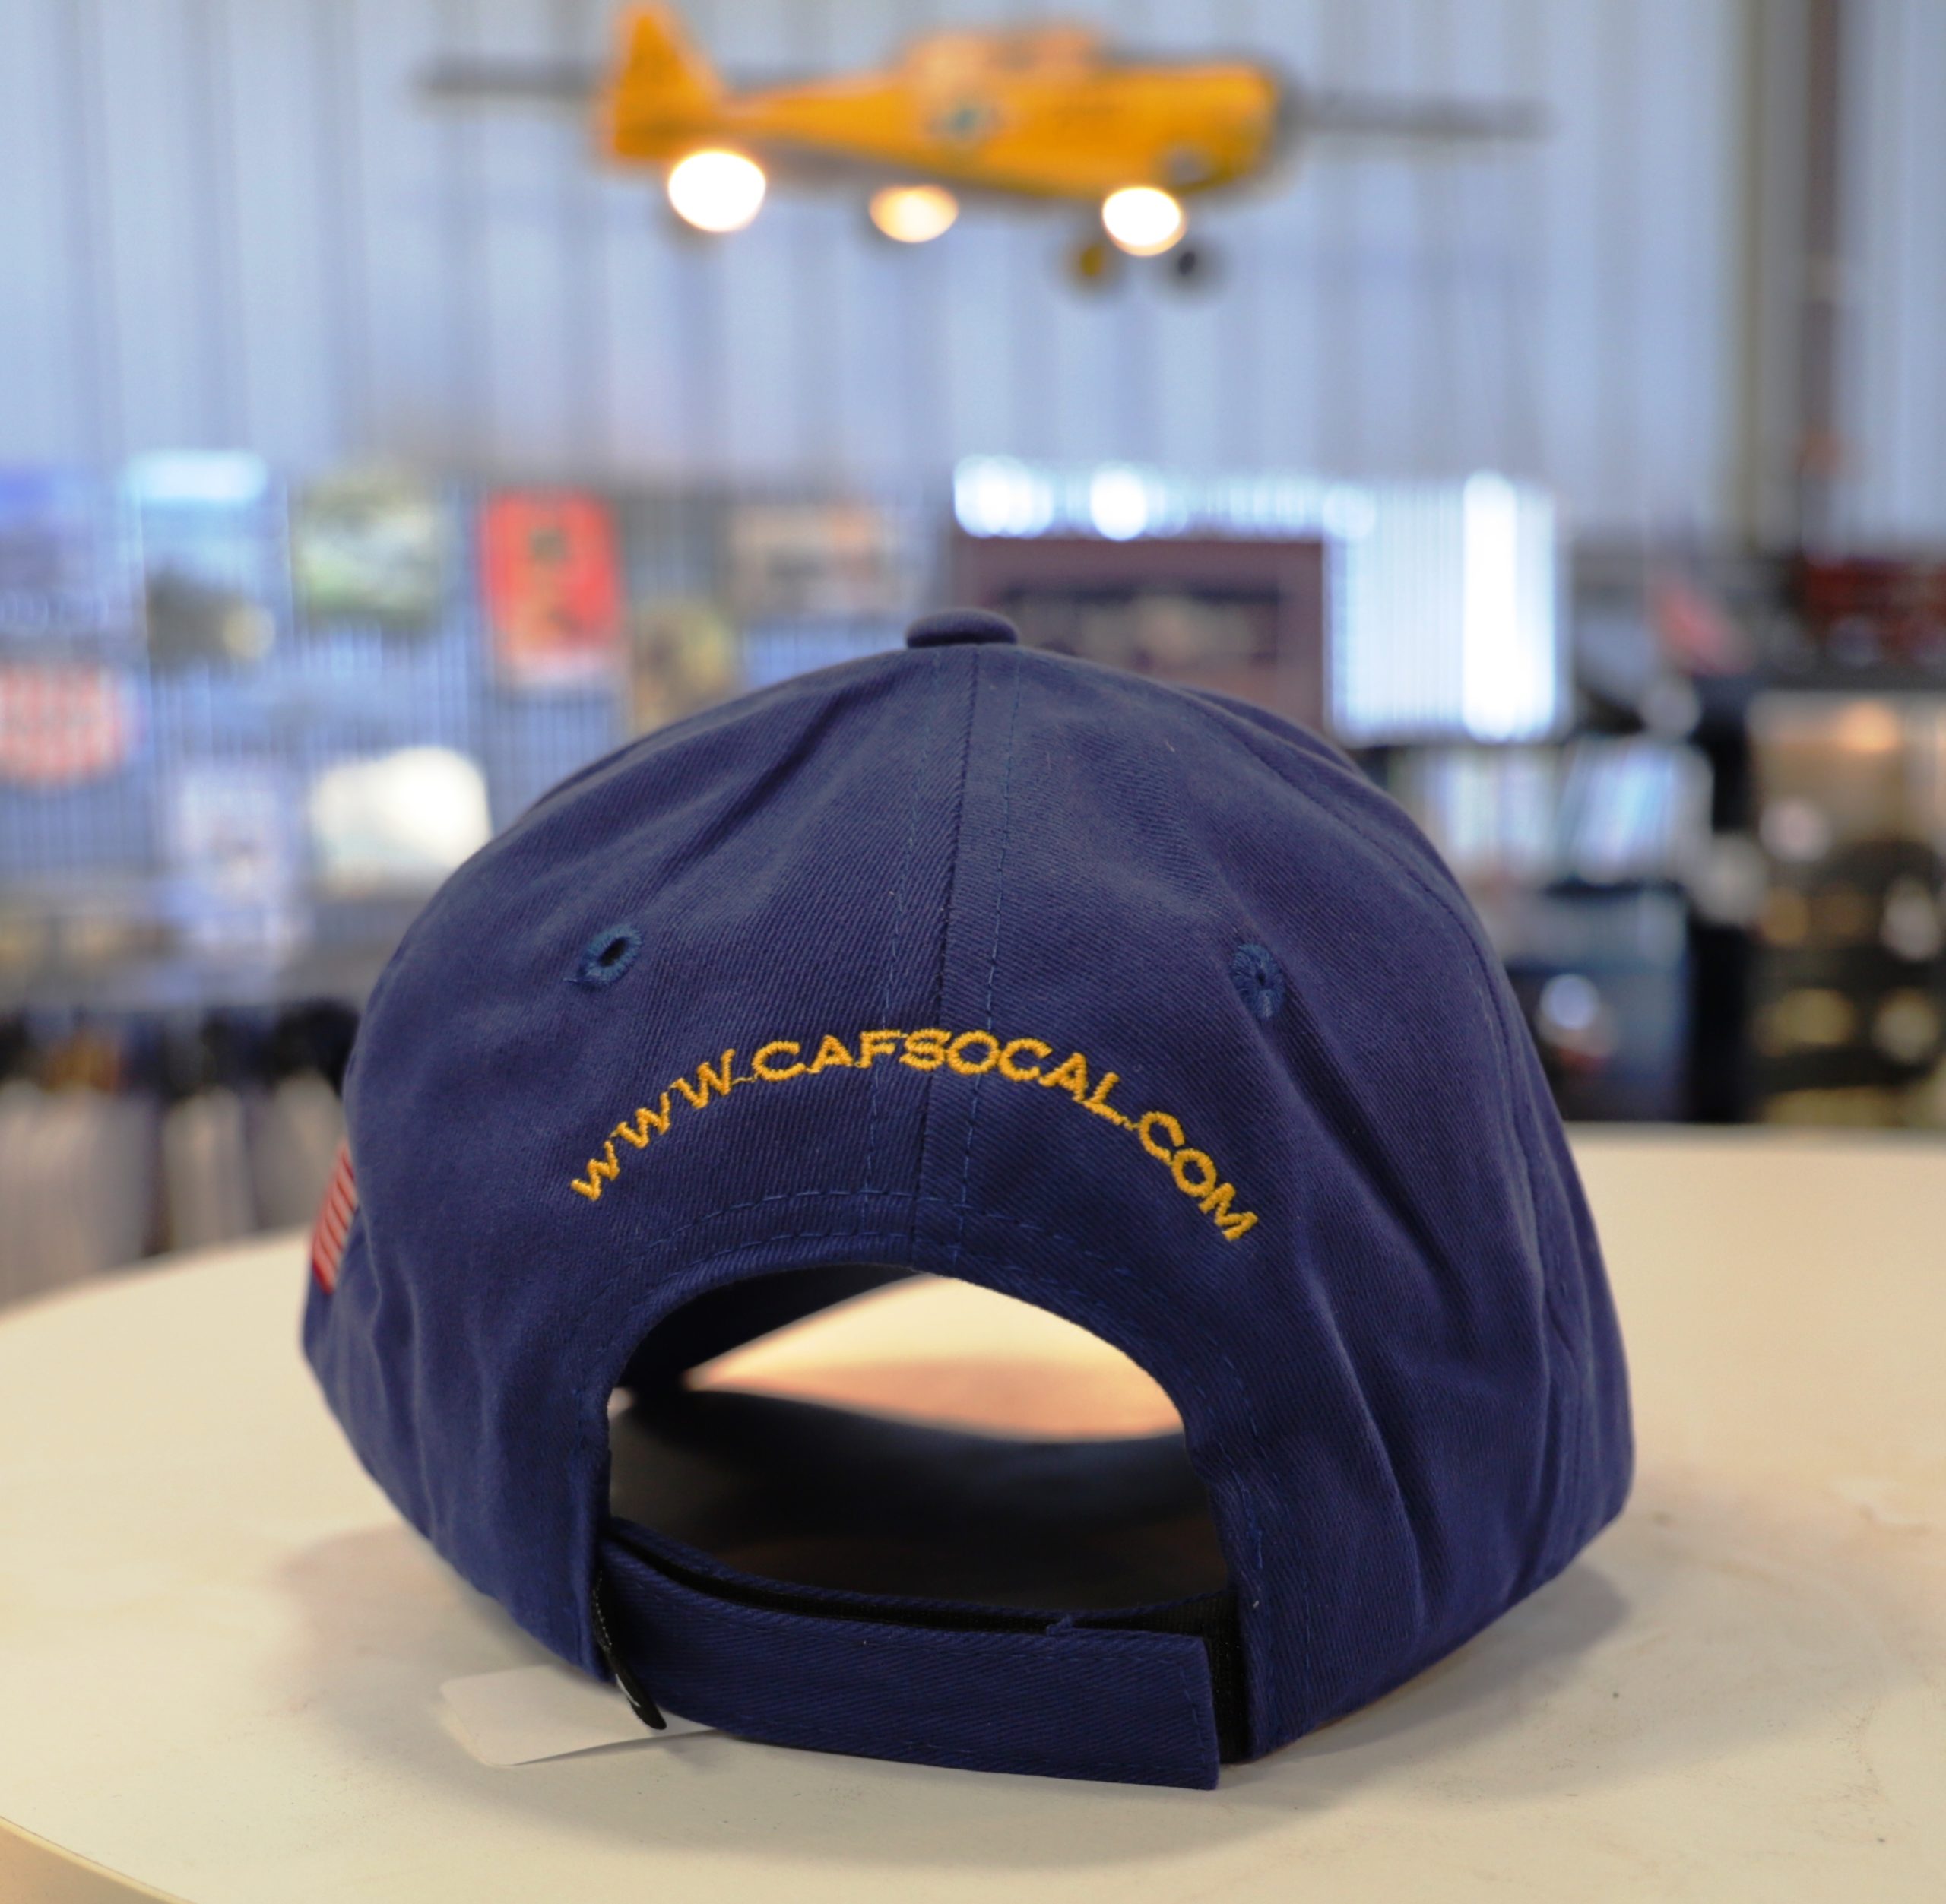 T-6 Texan Embroidered Hat 